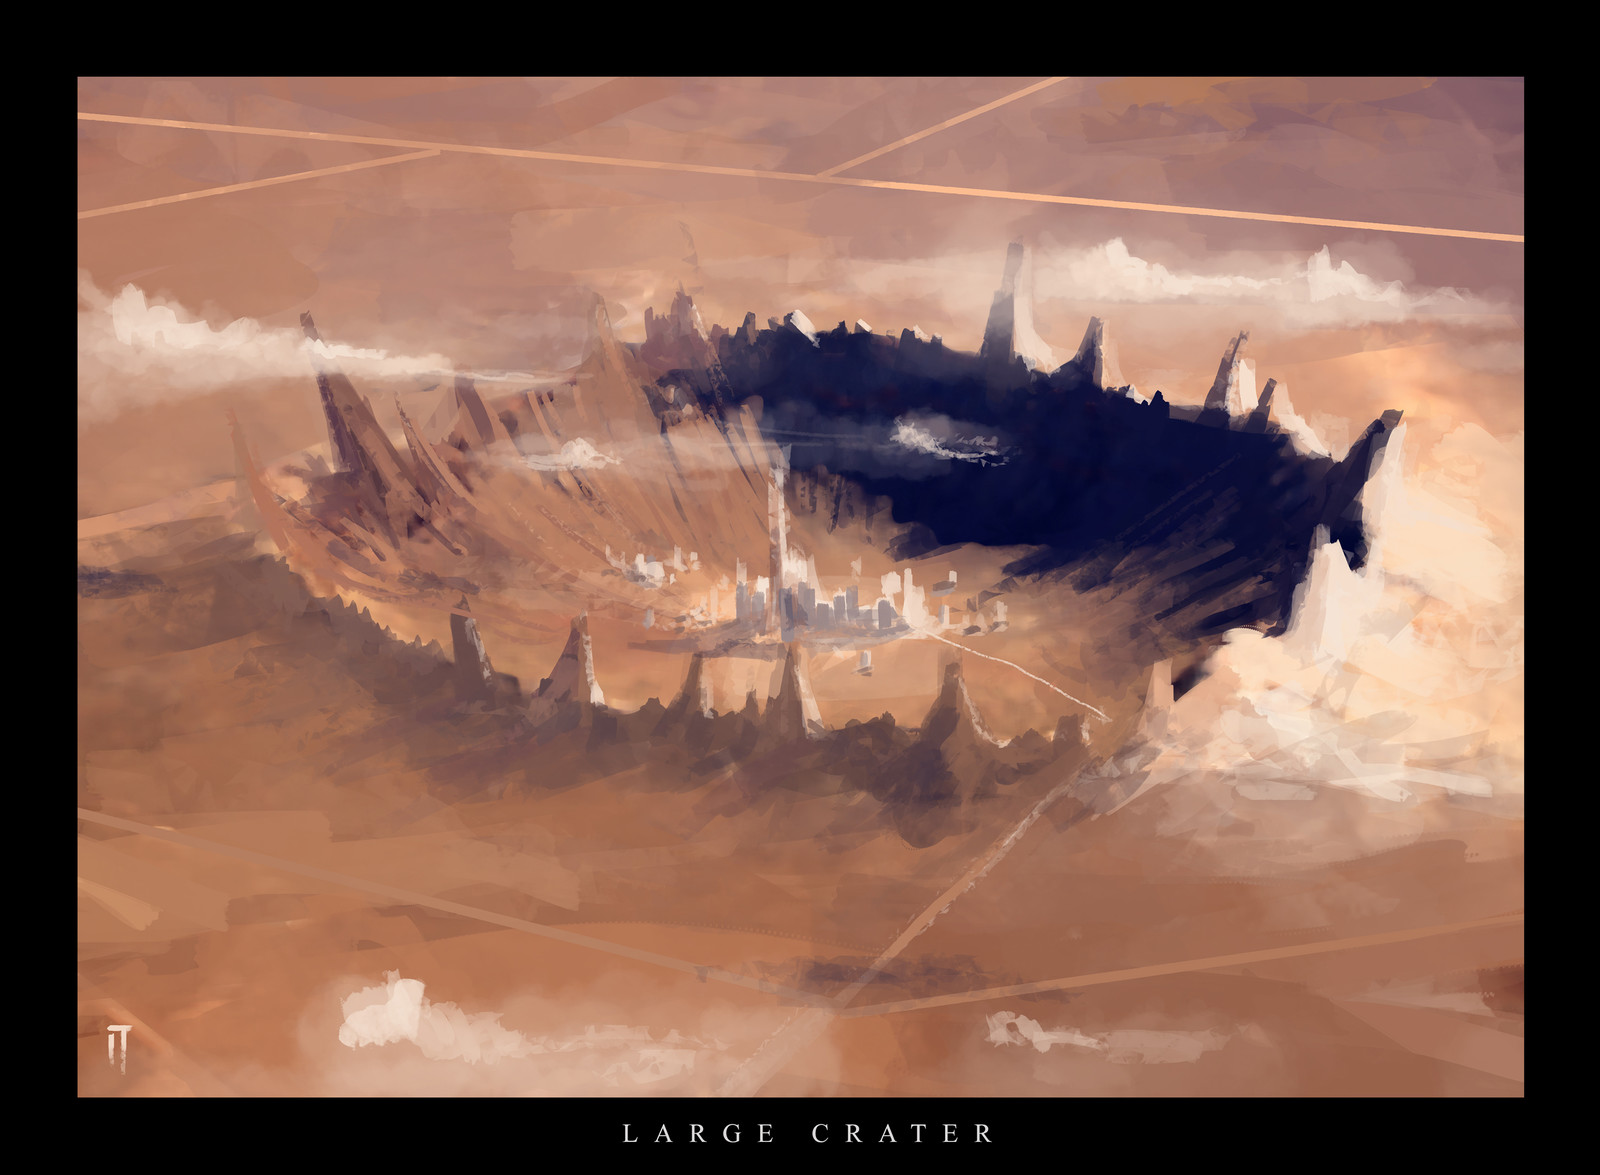 Two 30 min. Sketches - Large Crater and The Archaeologist